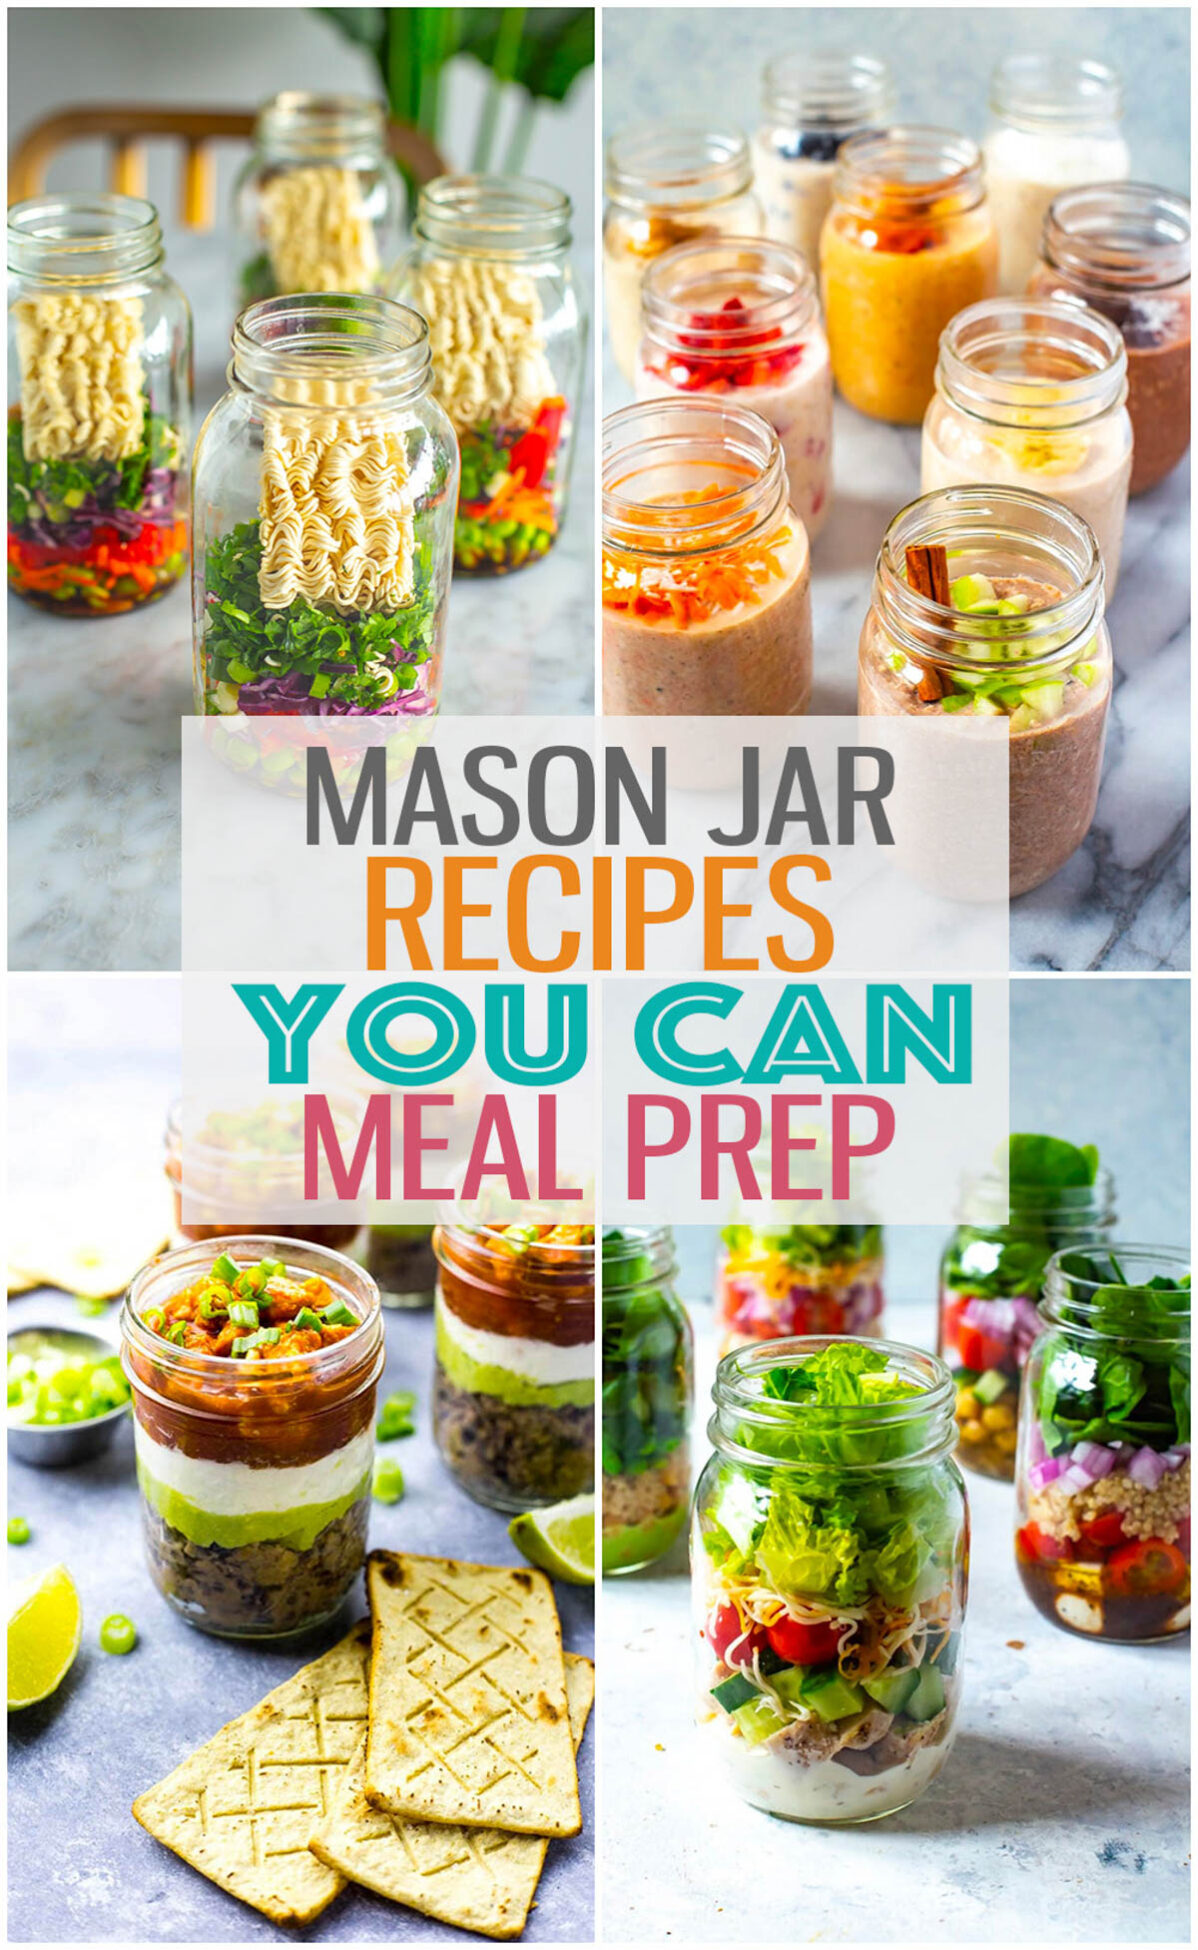 A collage of four different mason jar recipes with the text "Mason Jar Recipes You Can Meal Prep" layered over top.